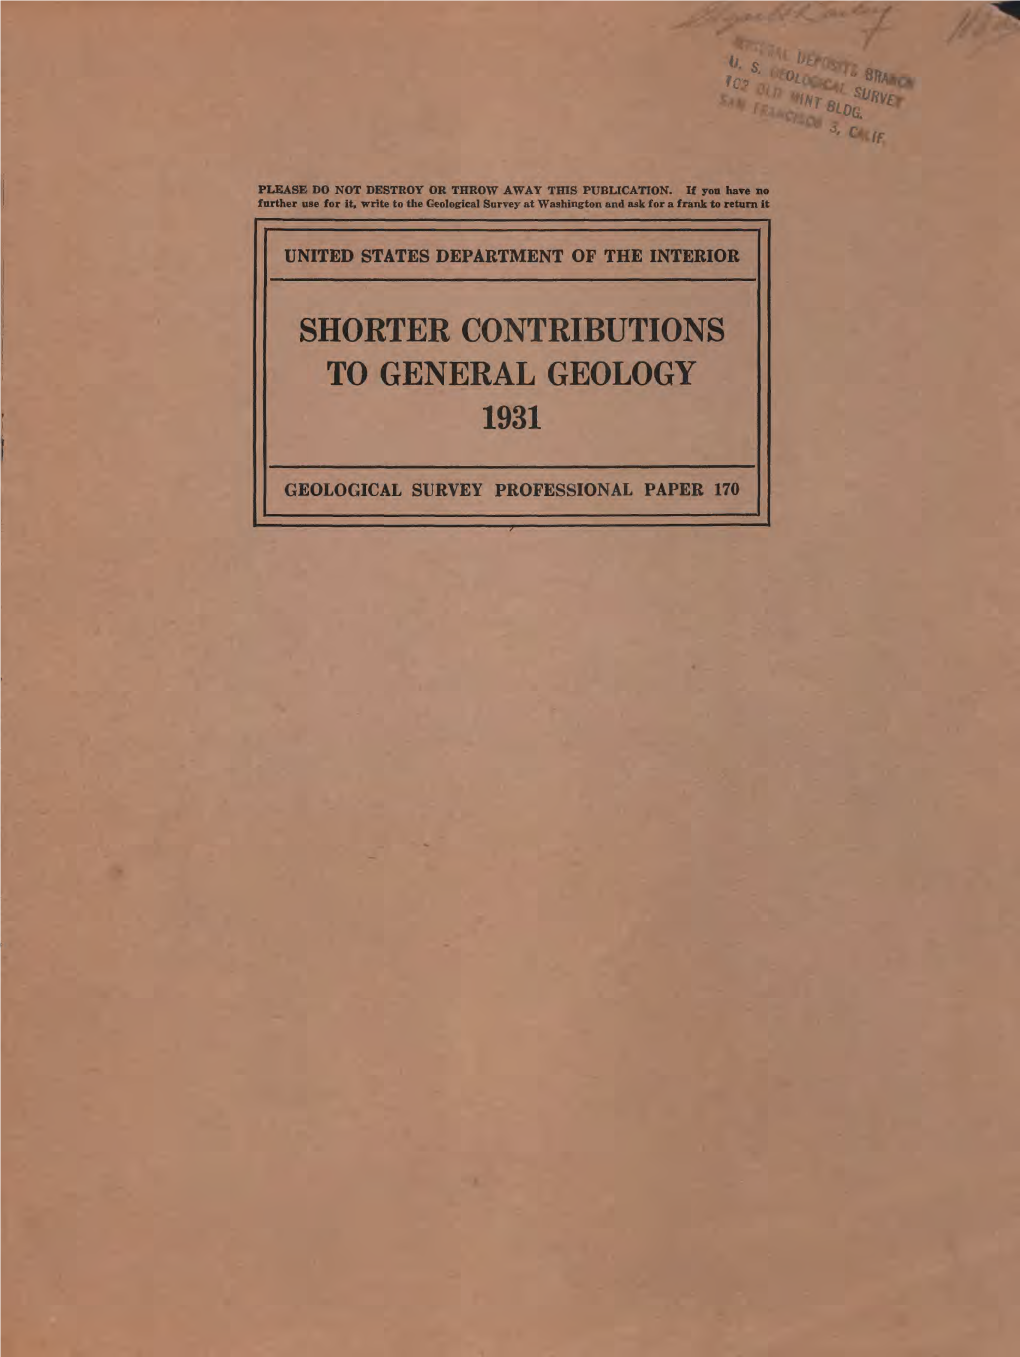 Shorter Contributions to General Geology 1931